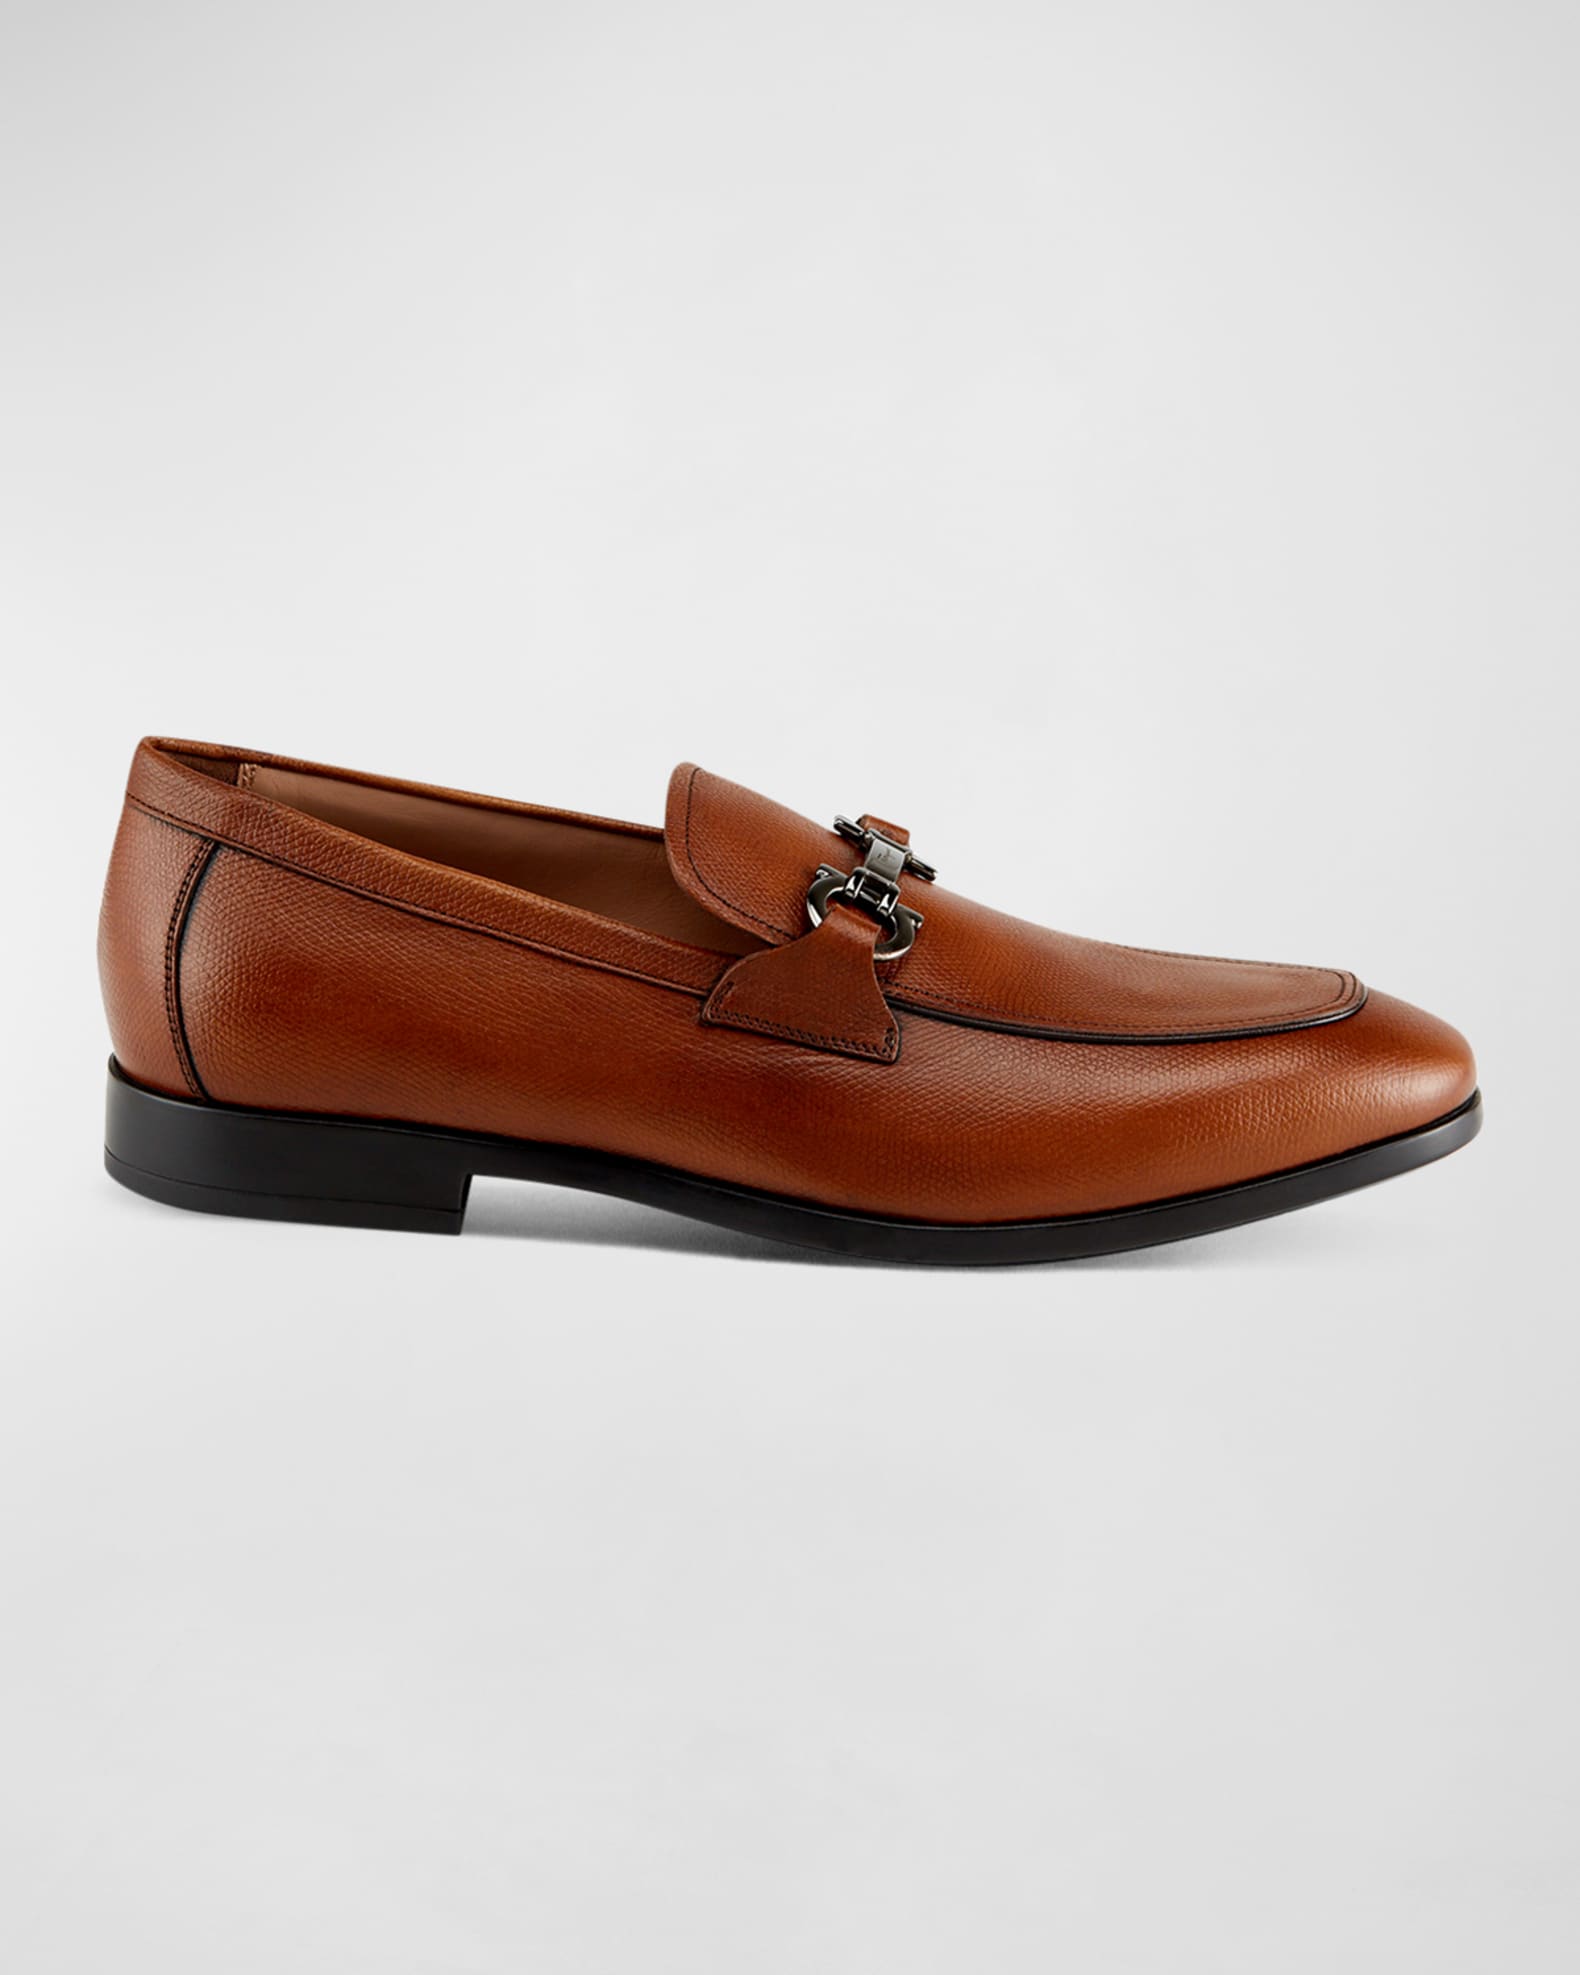 What To Wear With Ferragamo Loafers | susihomes.com